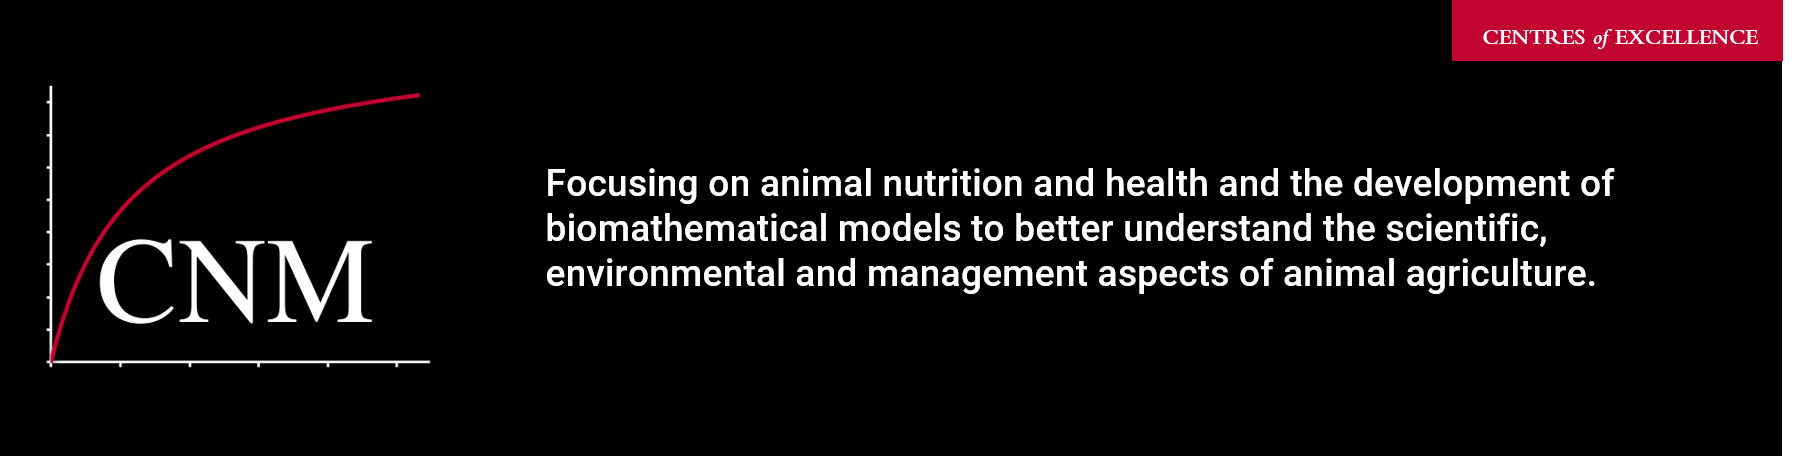 Centres of Excellence-Centre for Nutrition Modelling